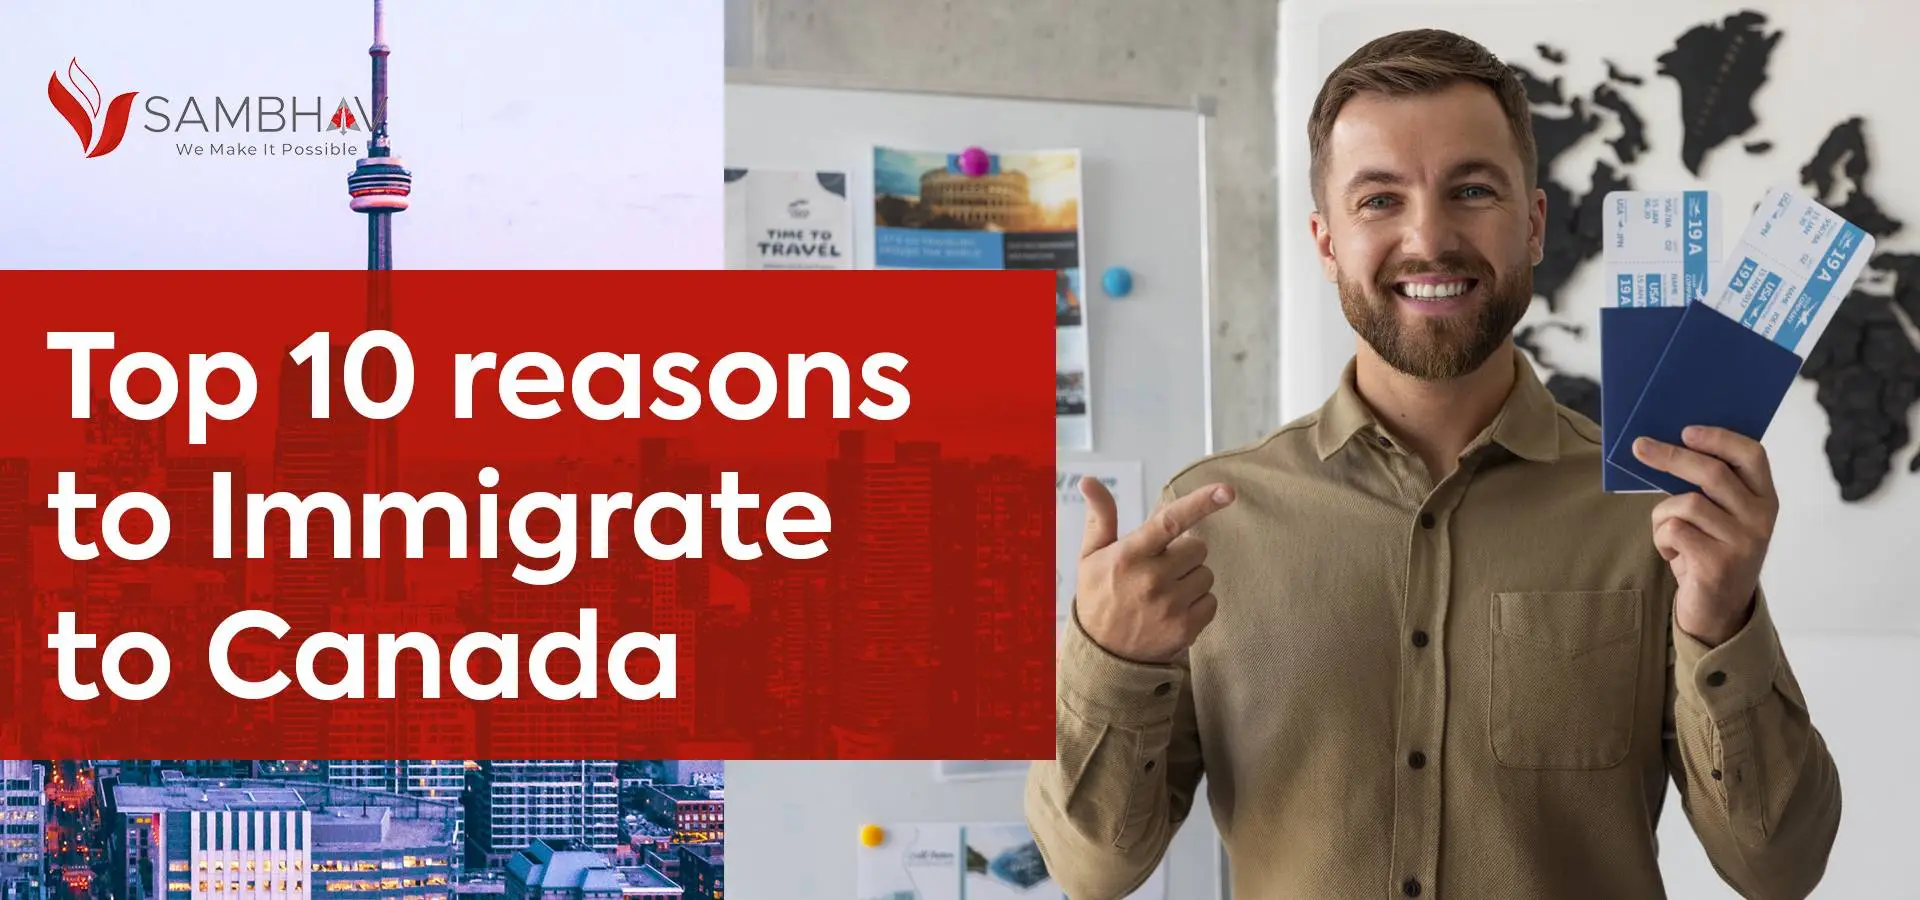 Top 10 Reasons to Immigrate to Canada